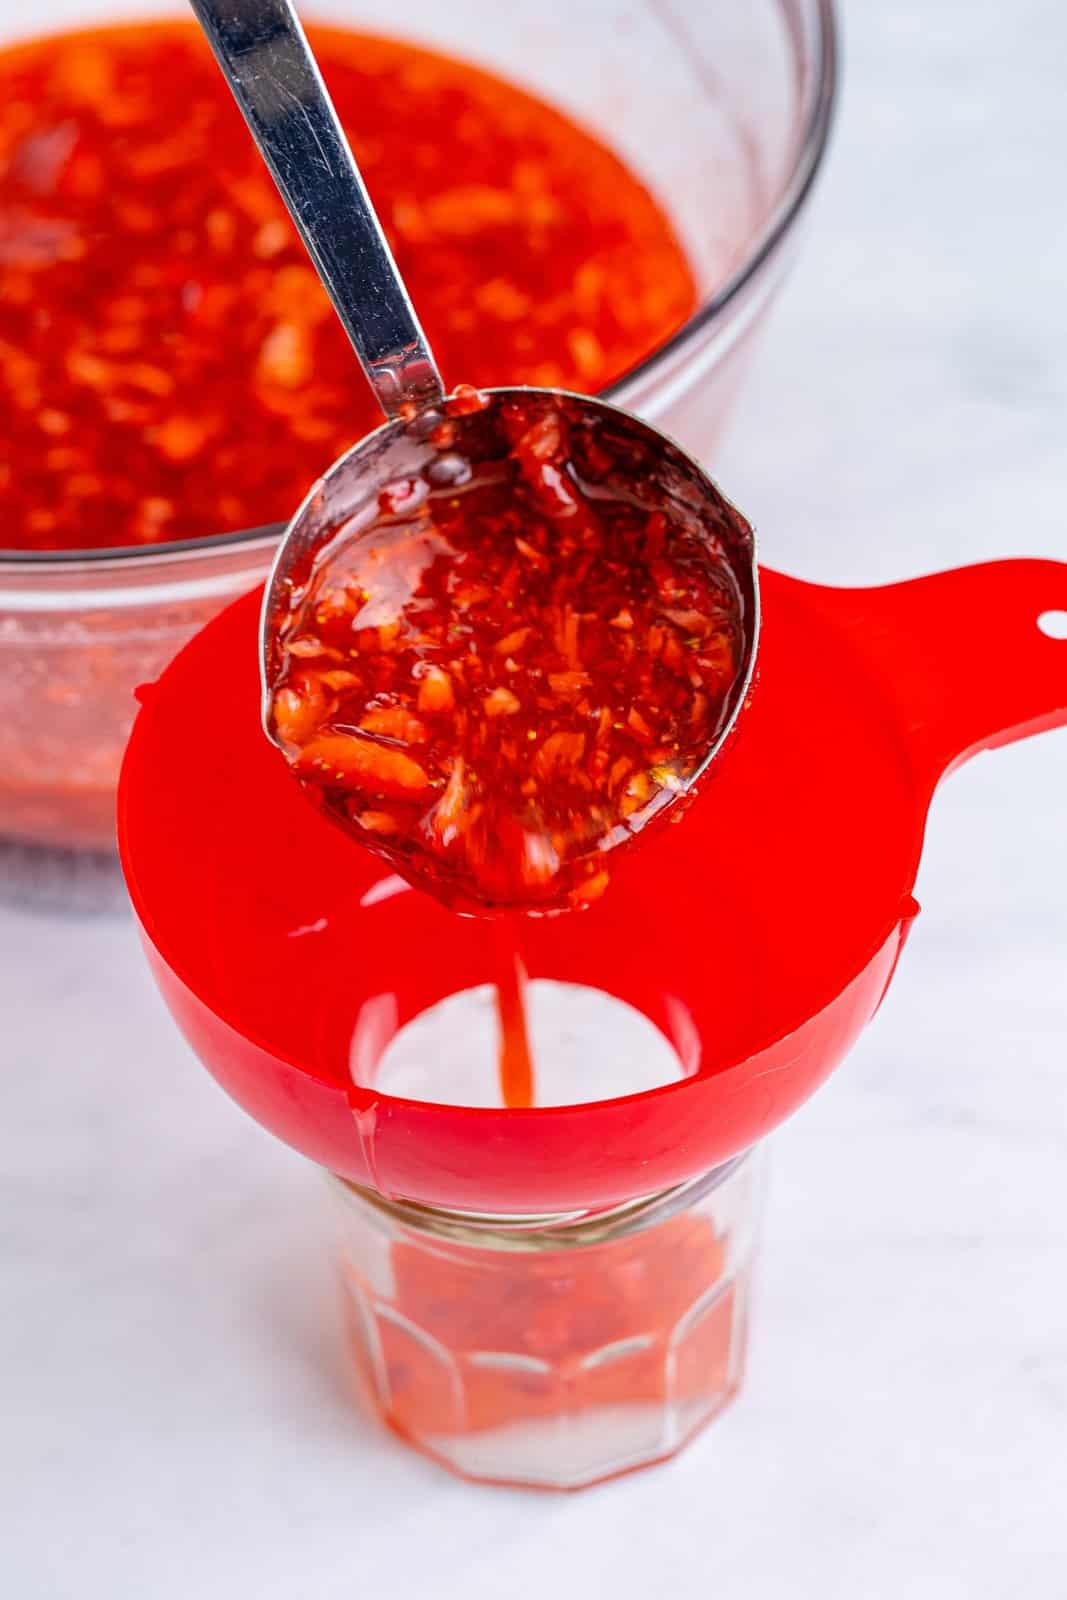 A ladle pouring in the strawberry jam through a funnel into a jar.